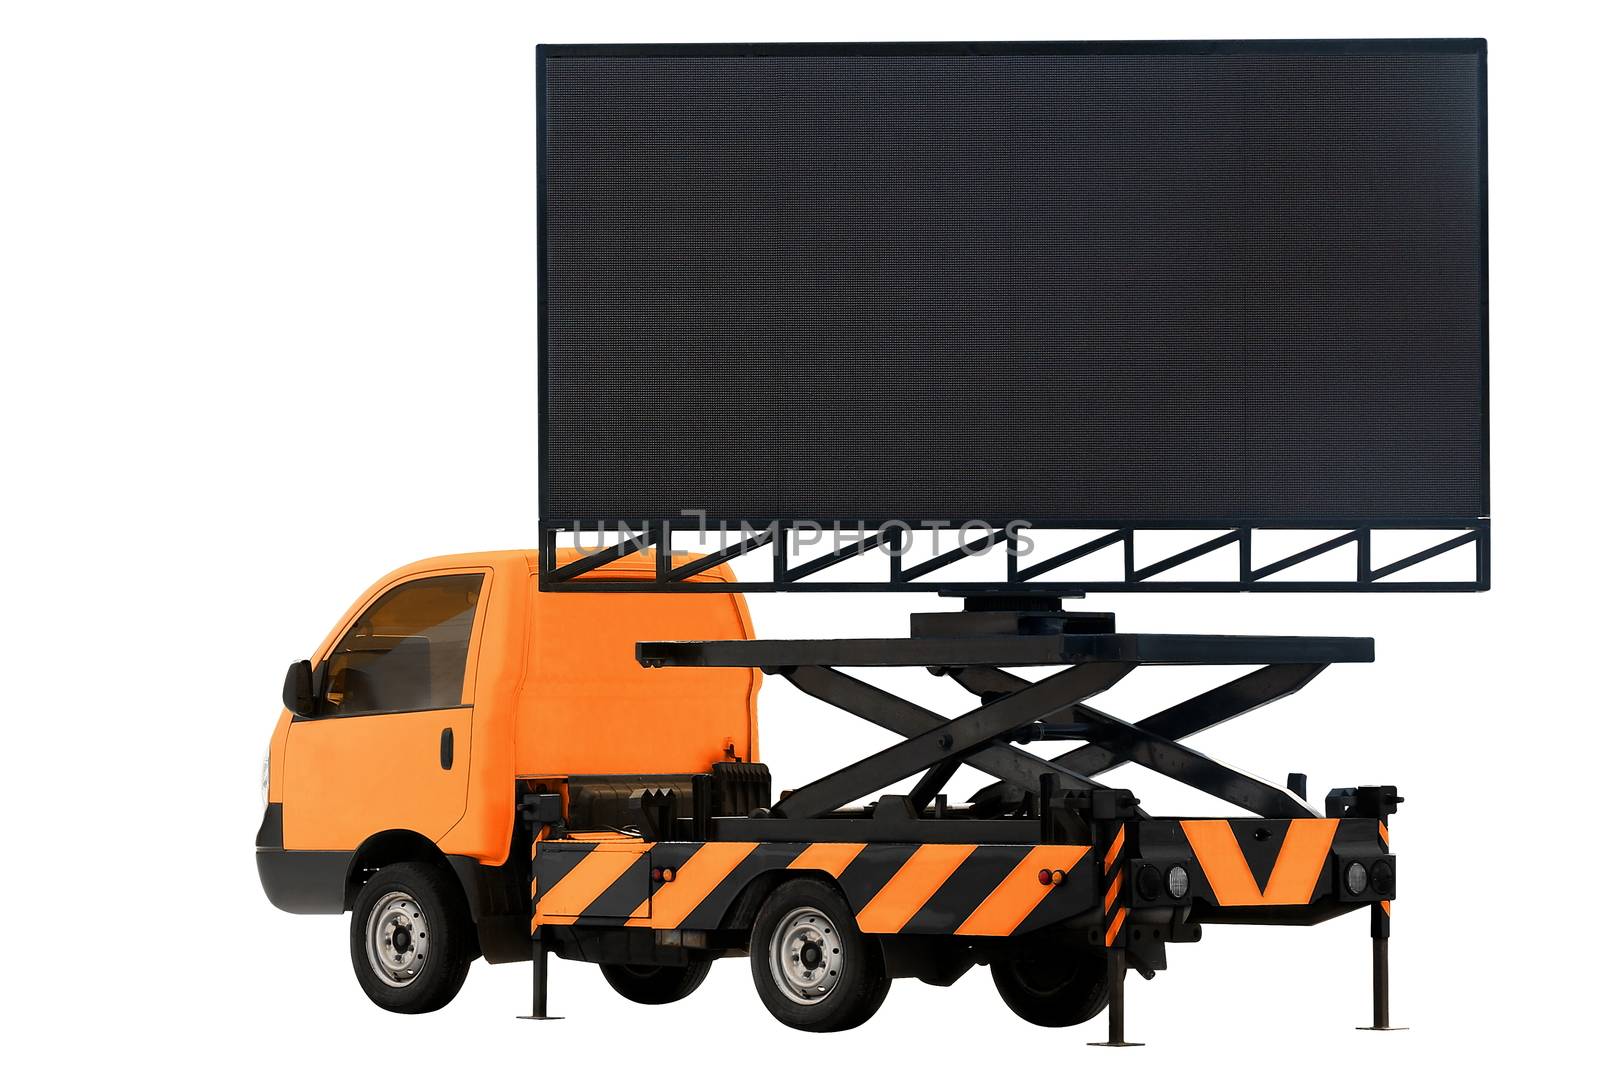 Billboard on car orange color LED panel for sign Advertising isolated on background white by cgdeaw